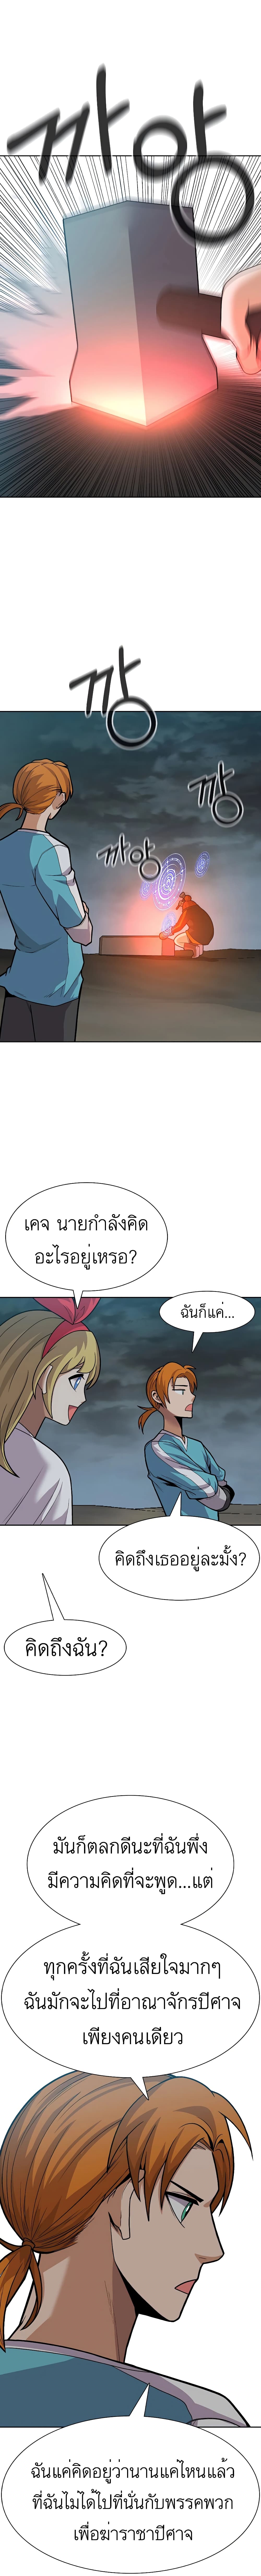 Raising Newbie Heroes In Another World ตอนที่ 27 (1)